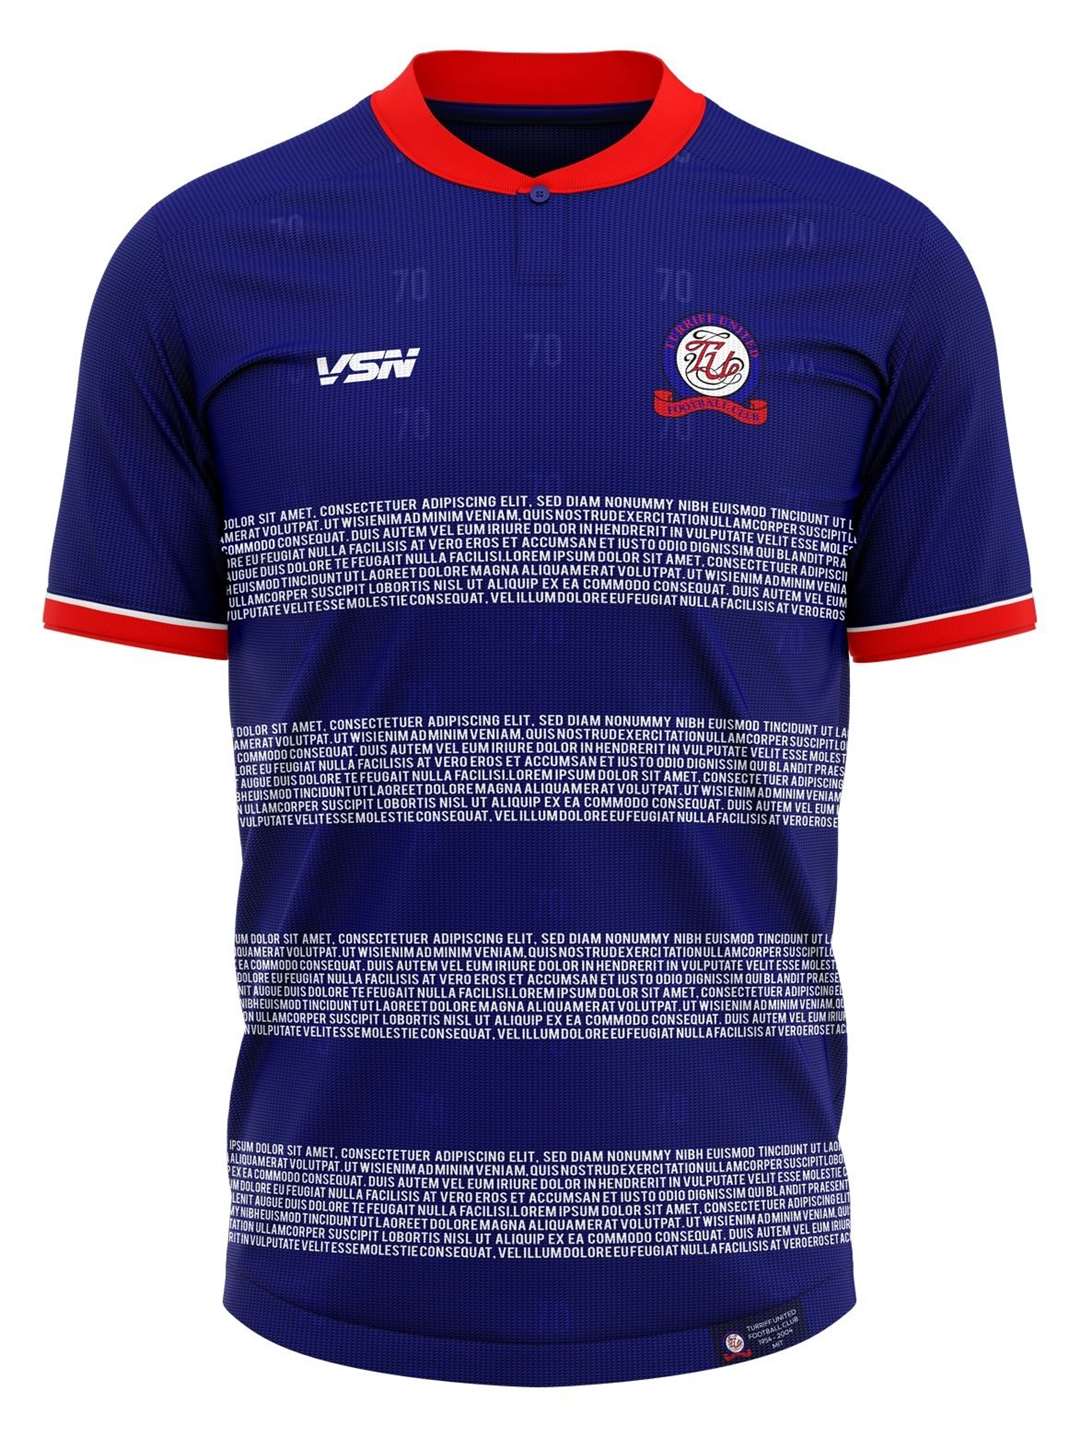 Turriff United have unveiled a special shirt to commemorate their 70th anniversary